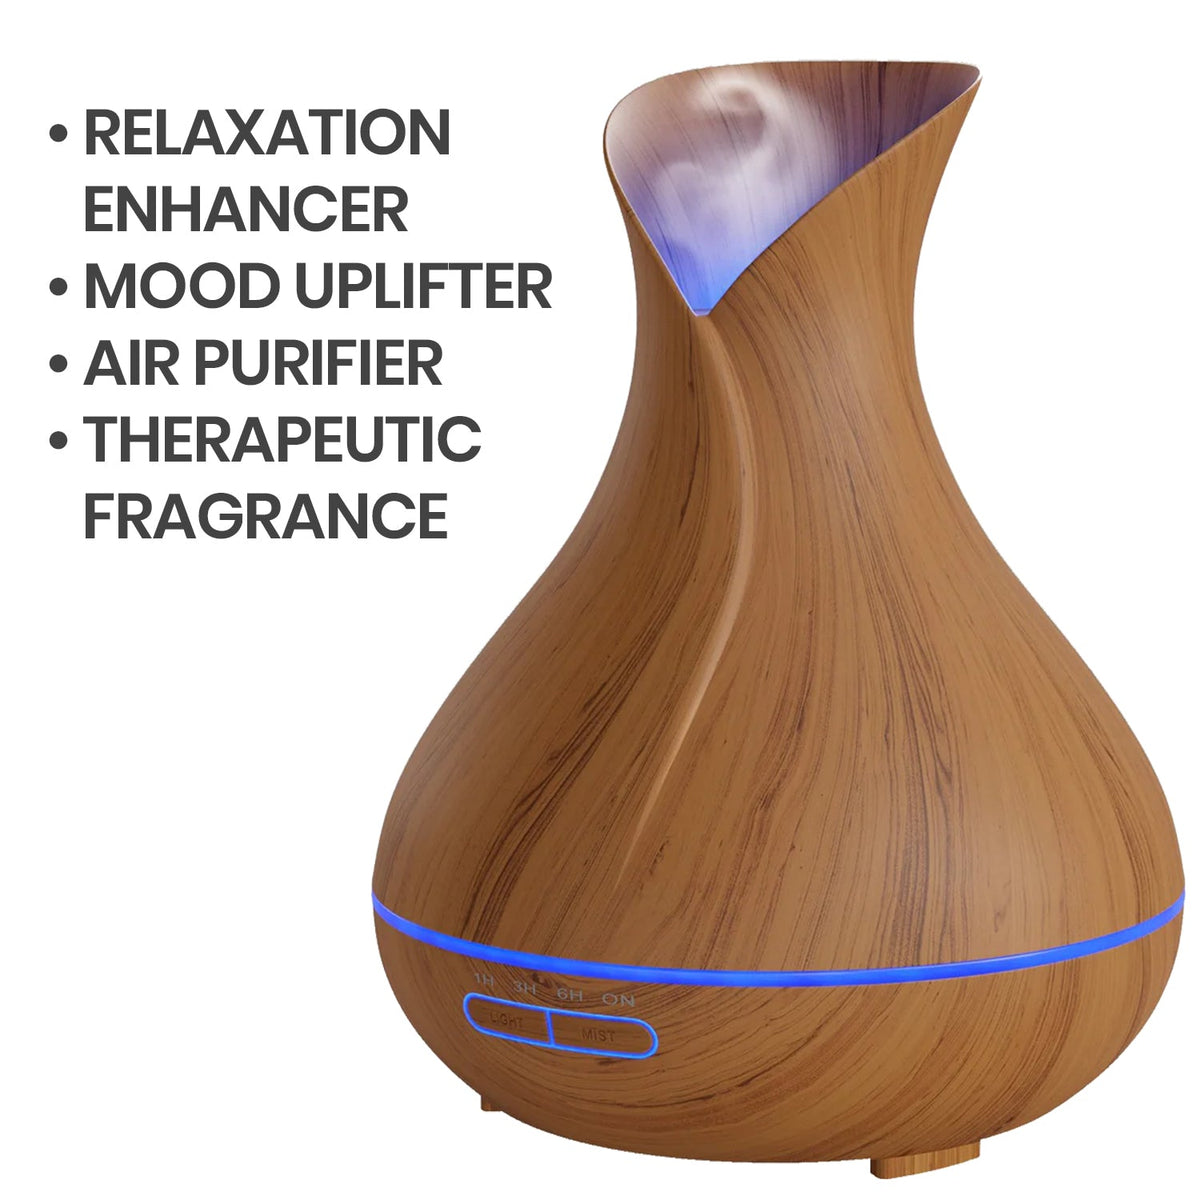 InnoGear Essential Oil Diffuser with Oils, 100ml Aromatherapy Diffuser with  6 Essential Oils Set, Aroma Cool Mist Humidifier Gift Set, Grey Wood Grain